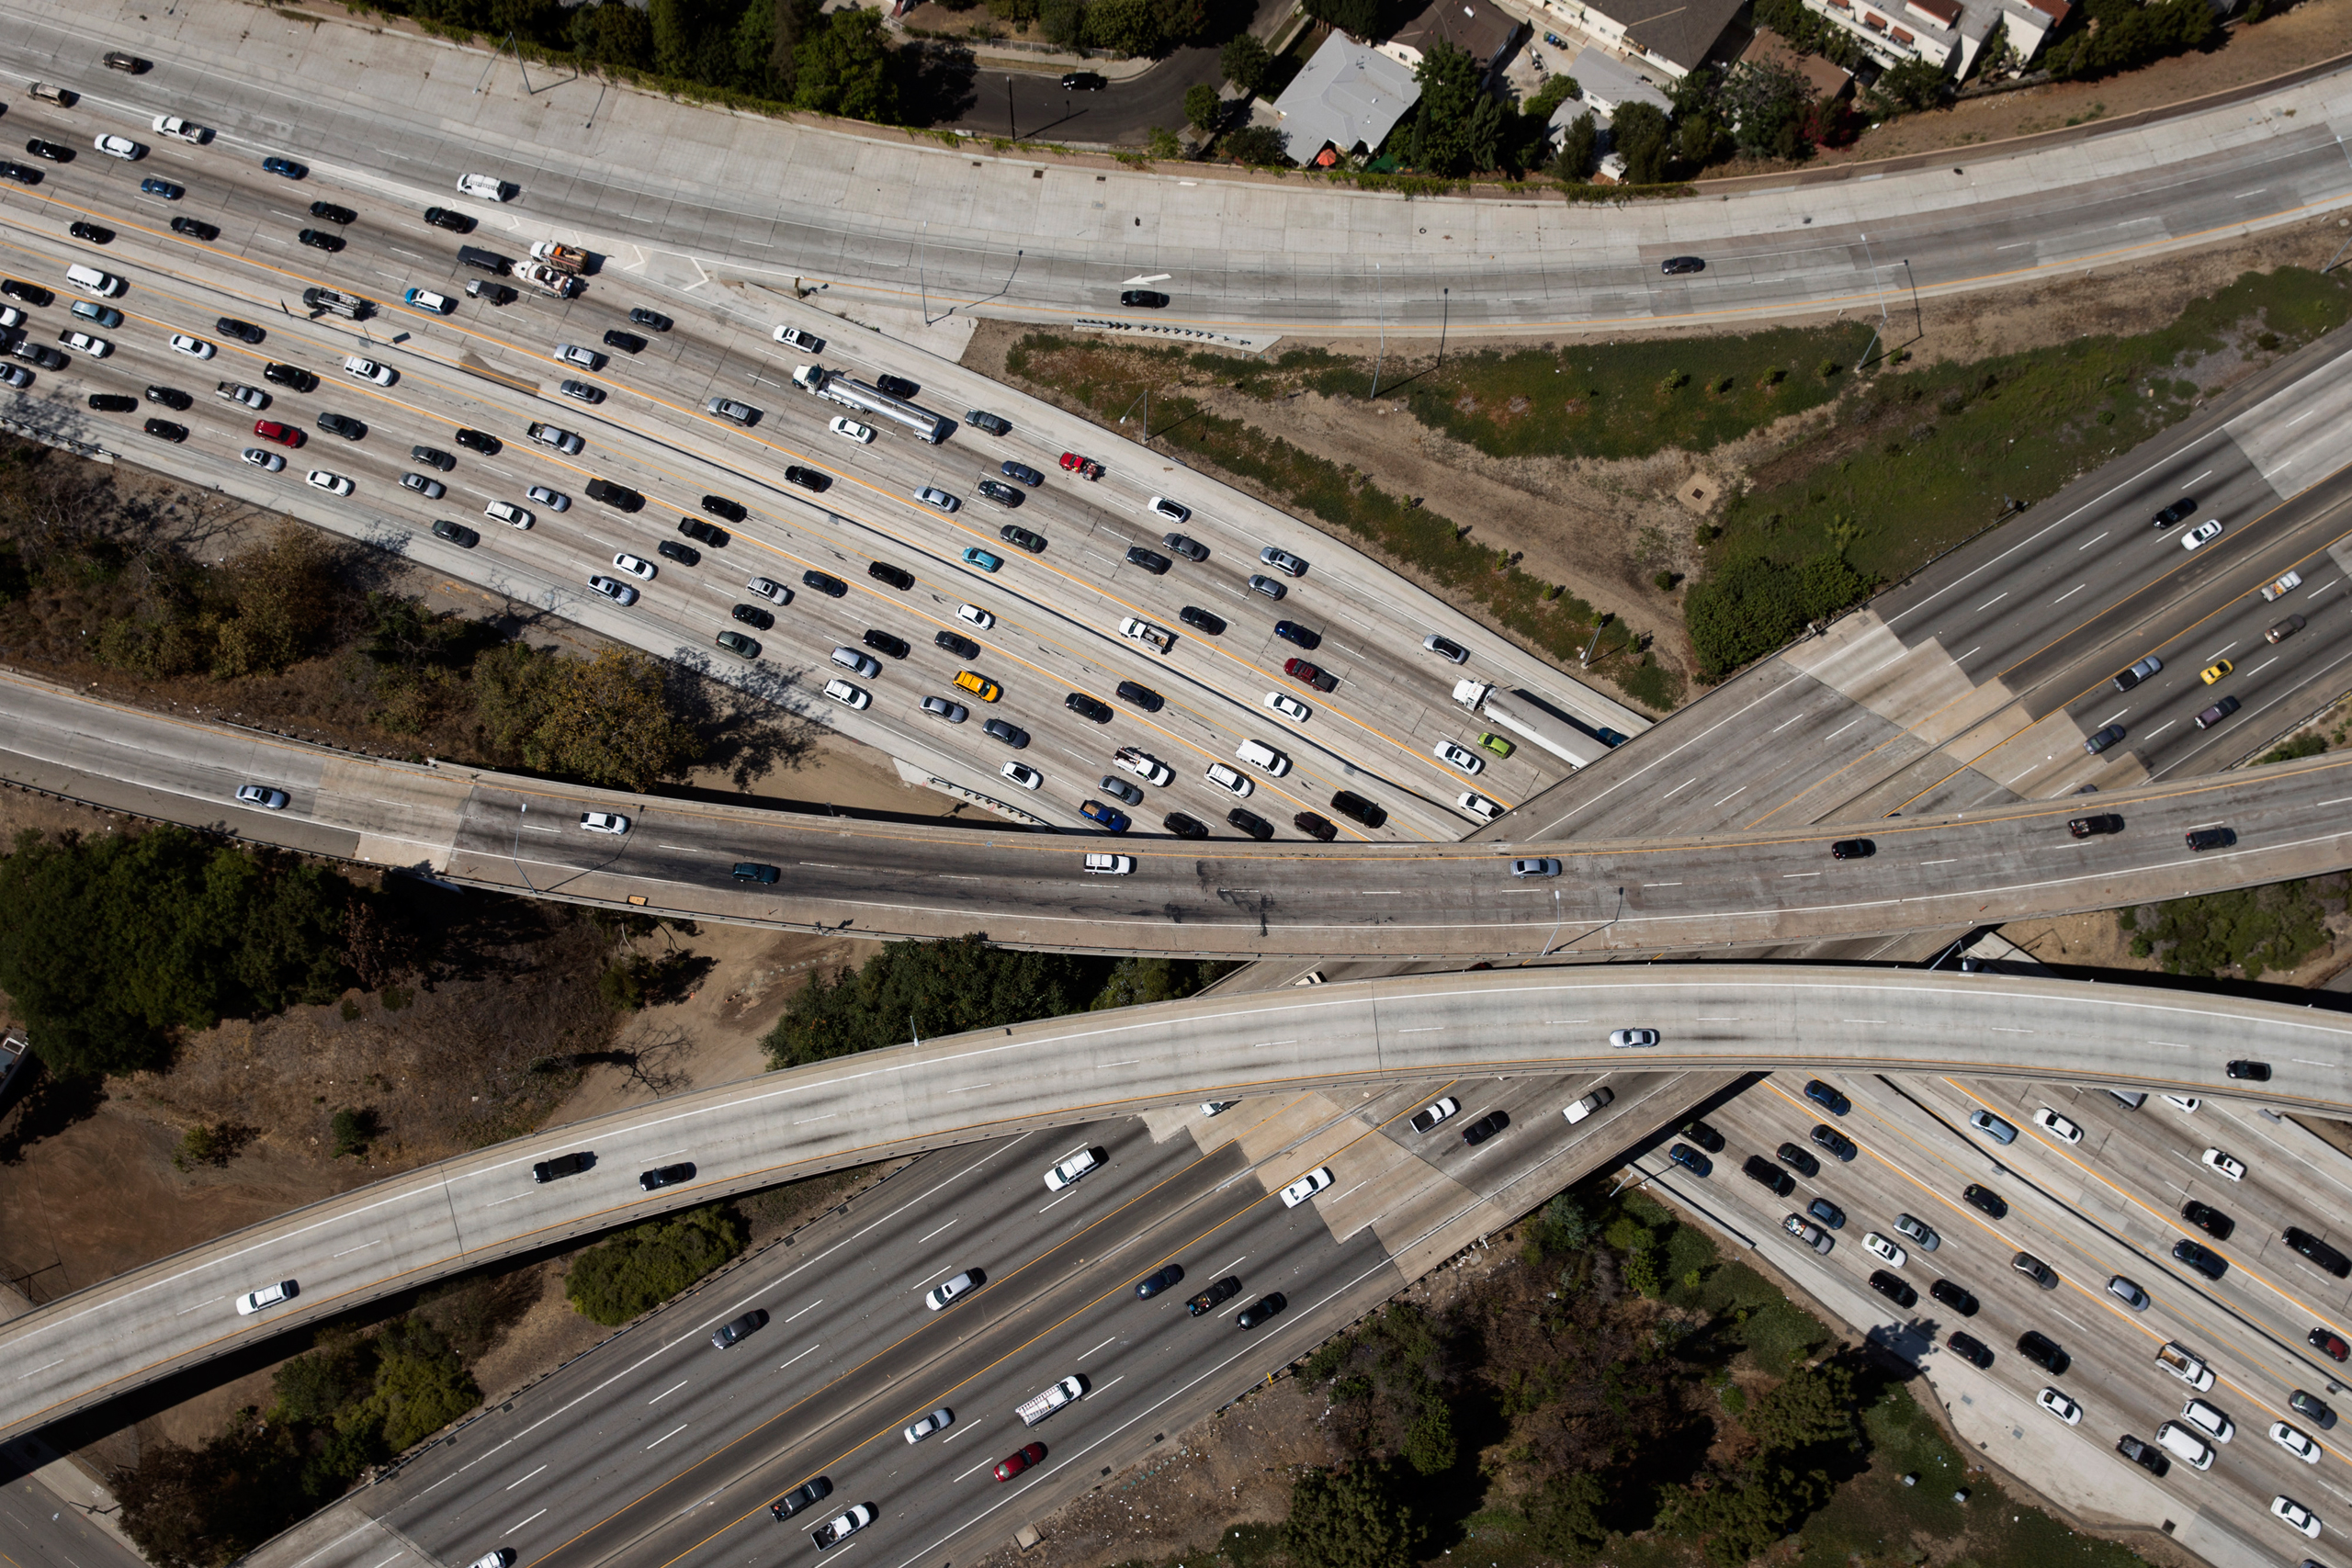 Traffic congestion from lost productivity, energy use and wear on vehicles costs $160 billion annually (Patrick T. Fallon—Bloomberg/Getty Images)